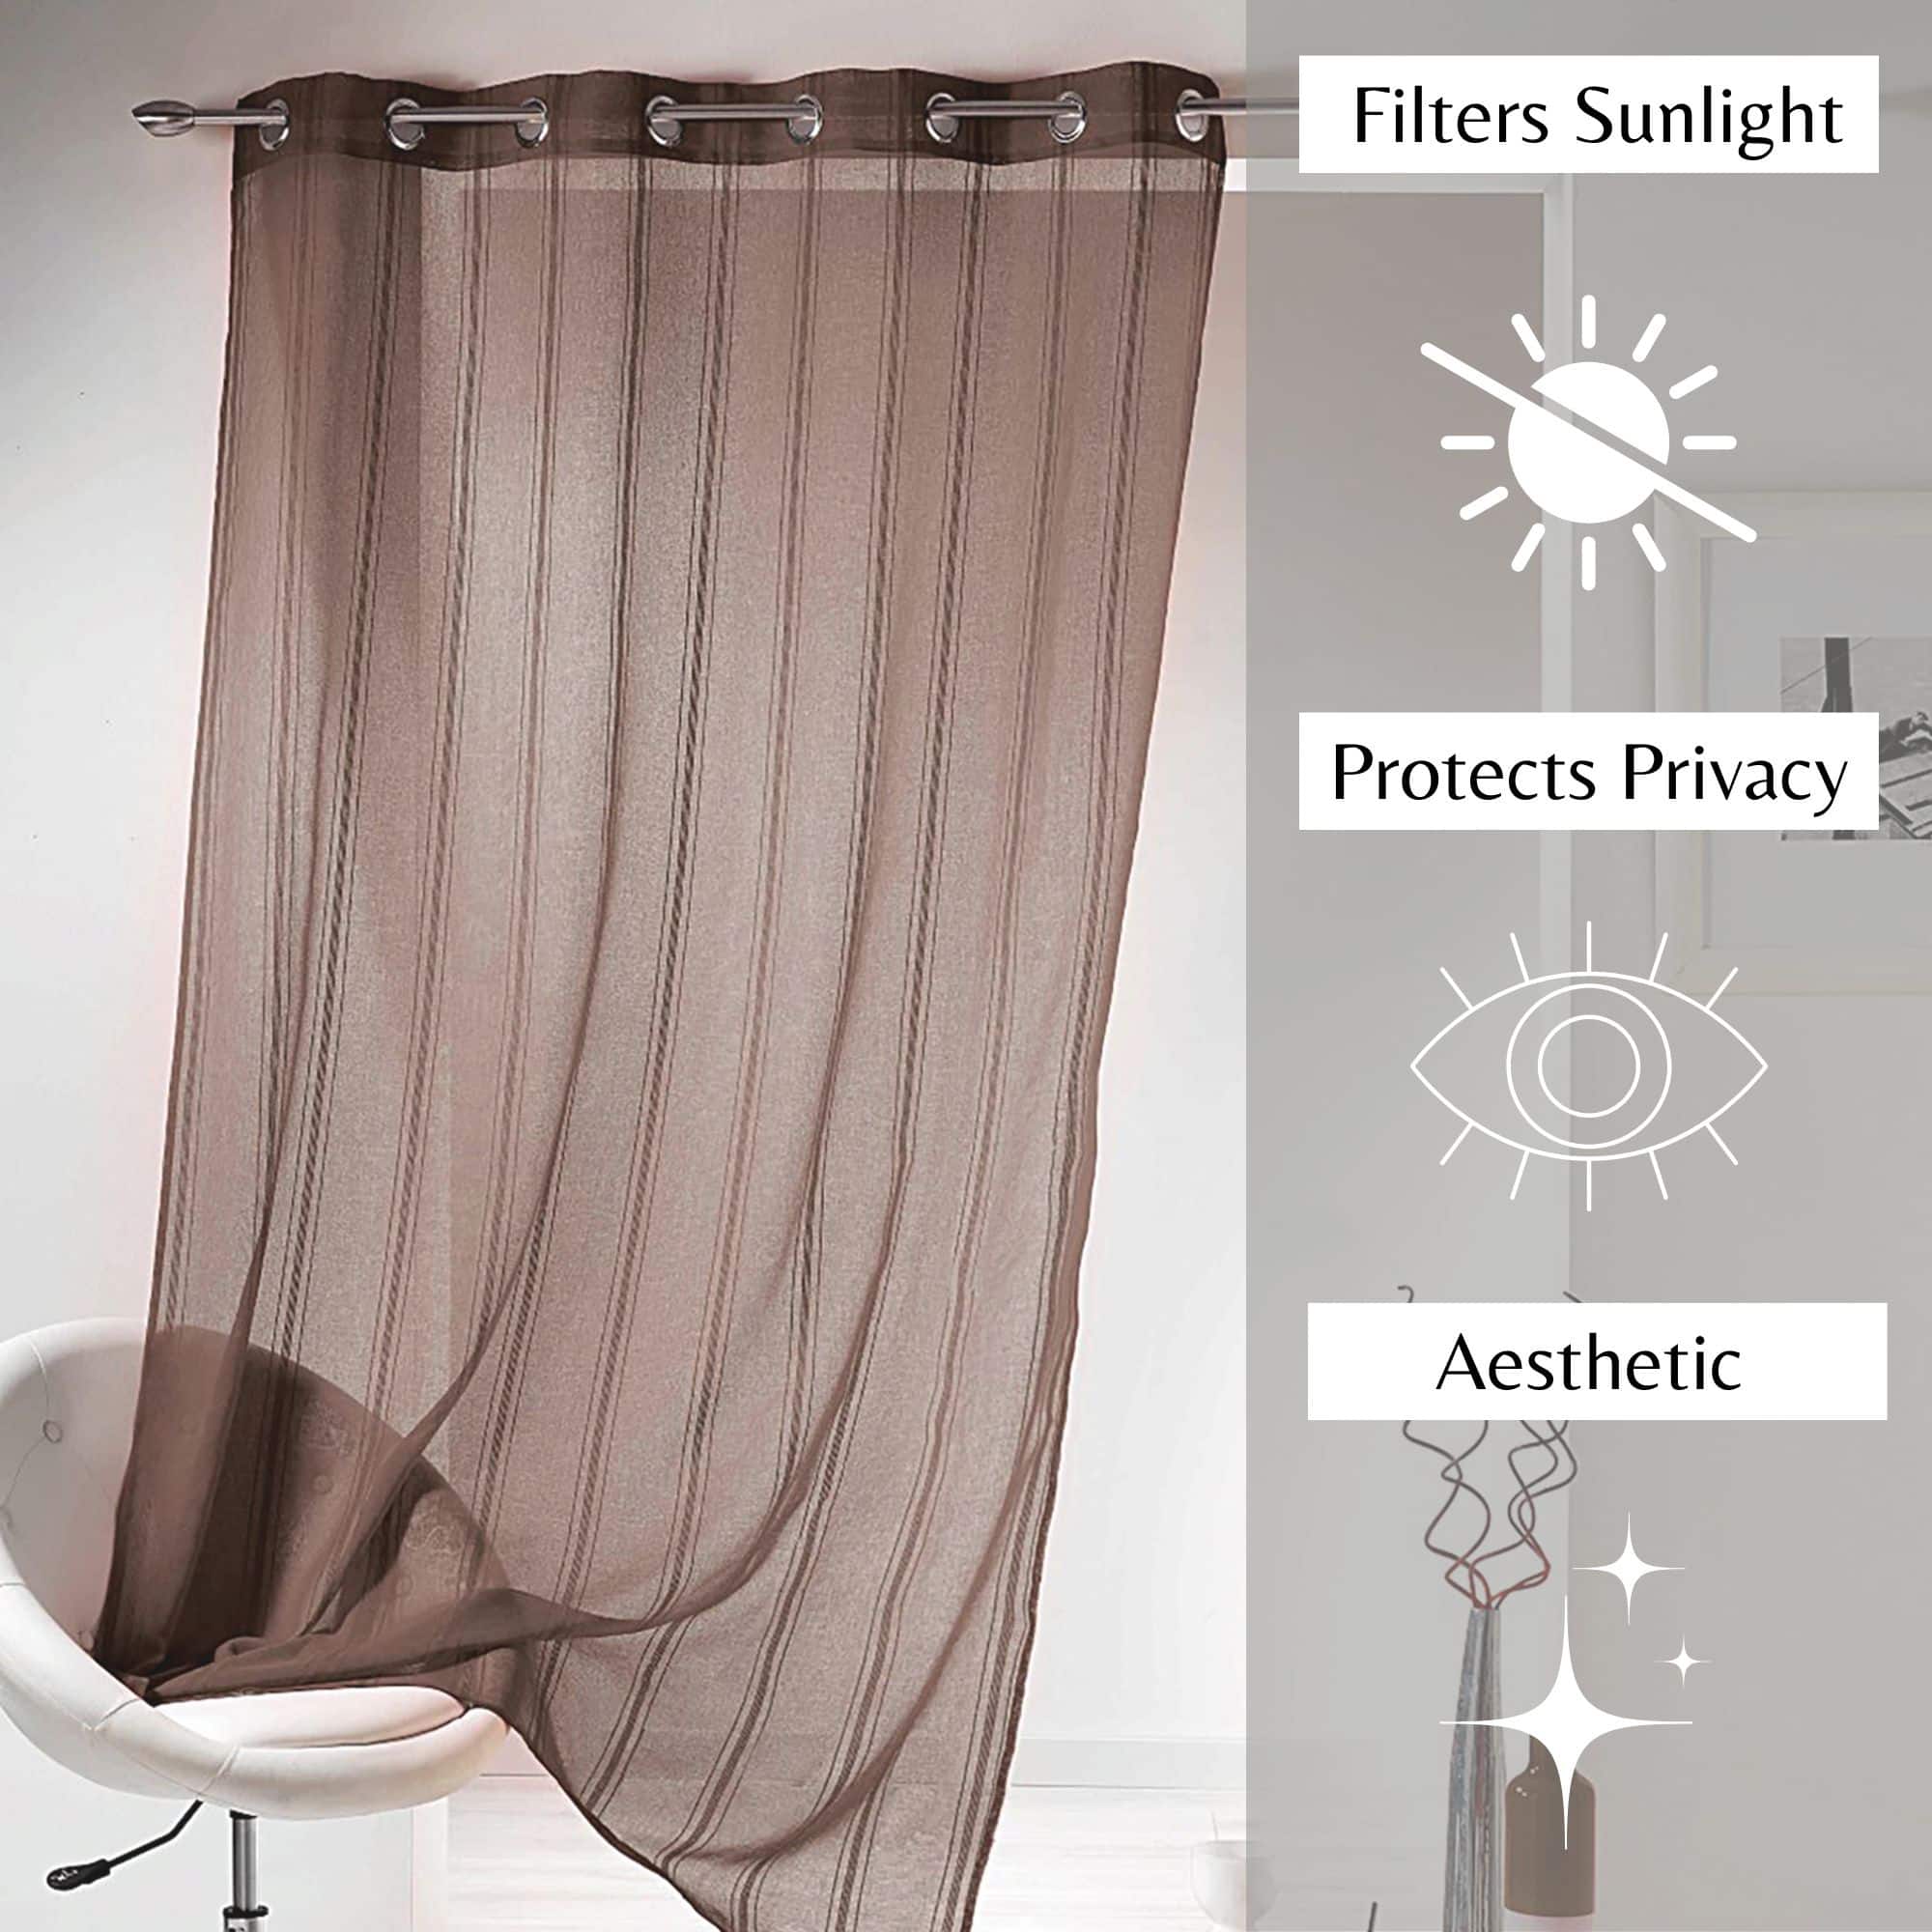 filter sunlight protect privacy aesthetic dual sheer voiles for home decor